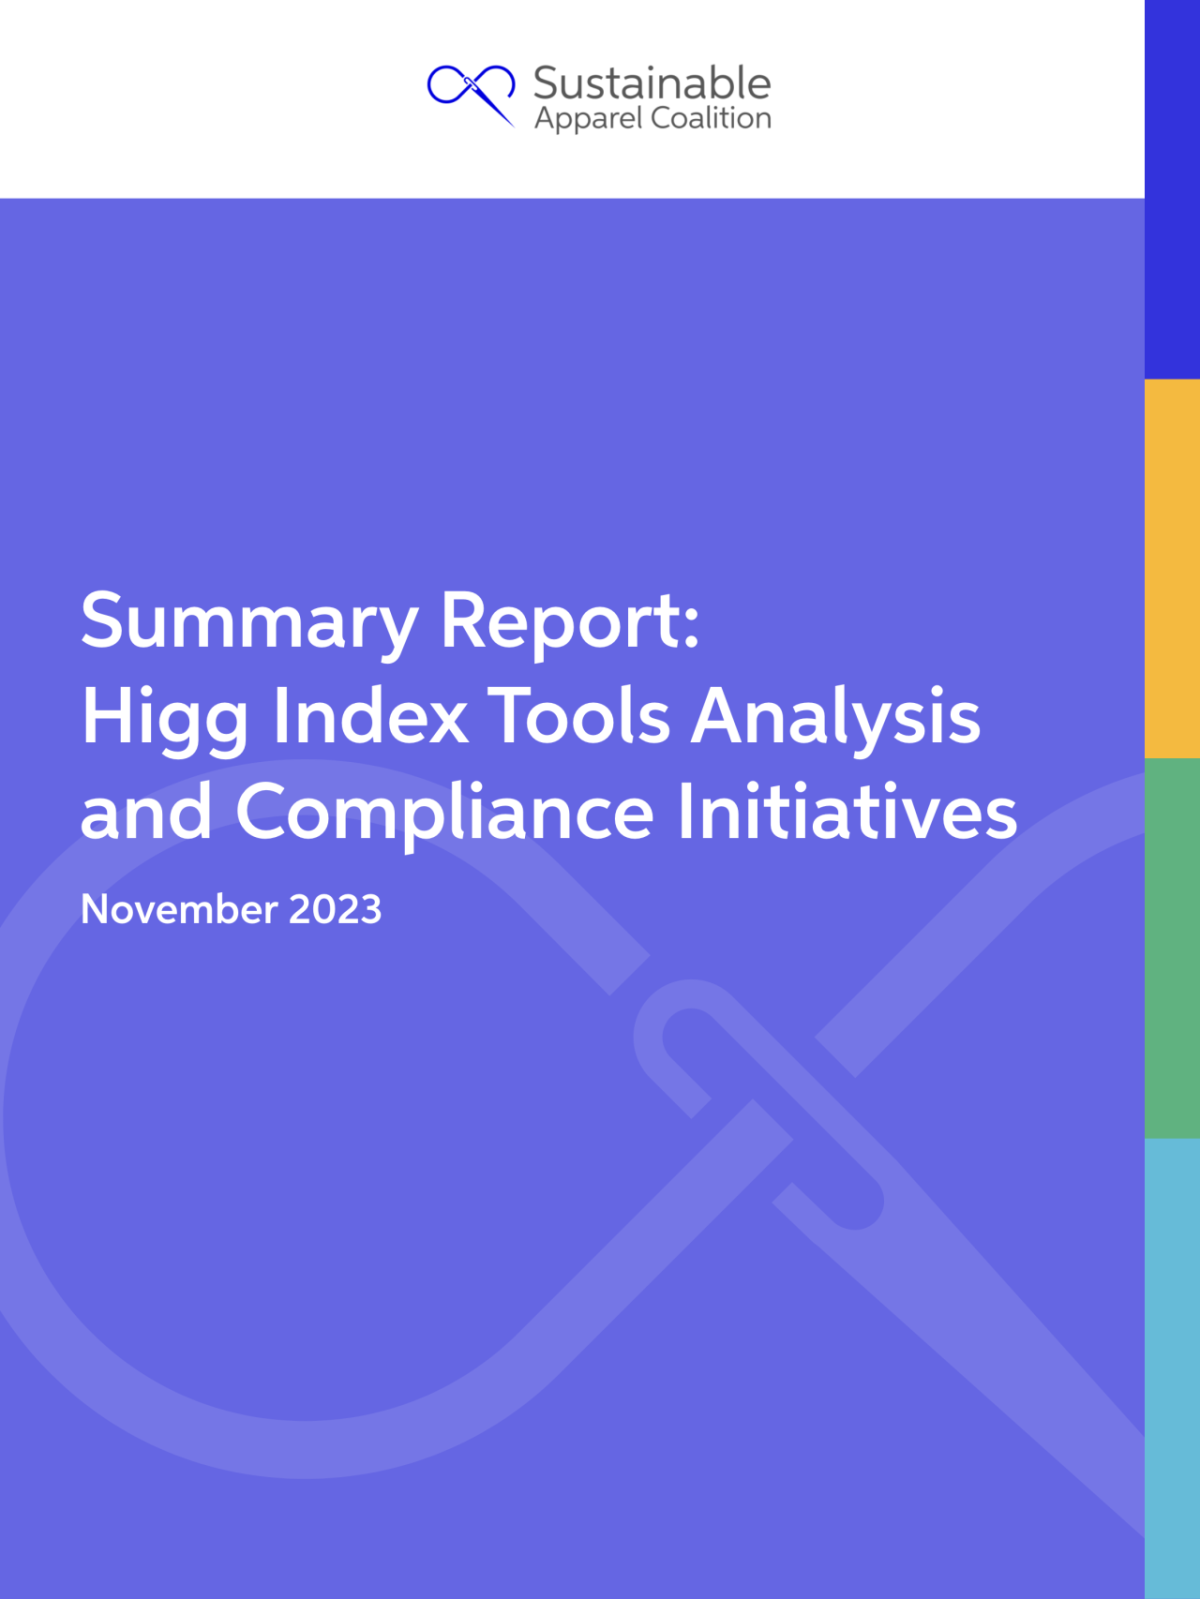 Summary Report Cover